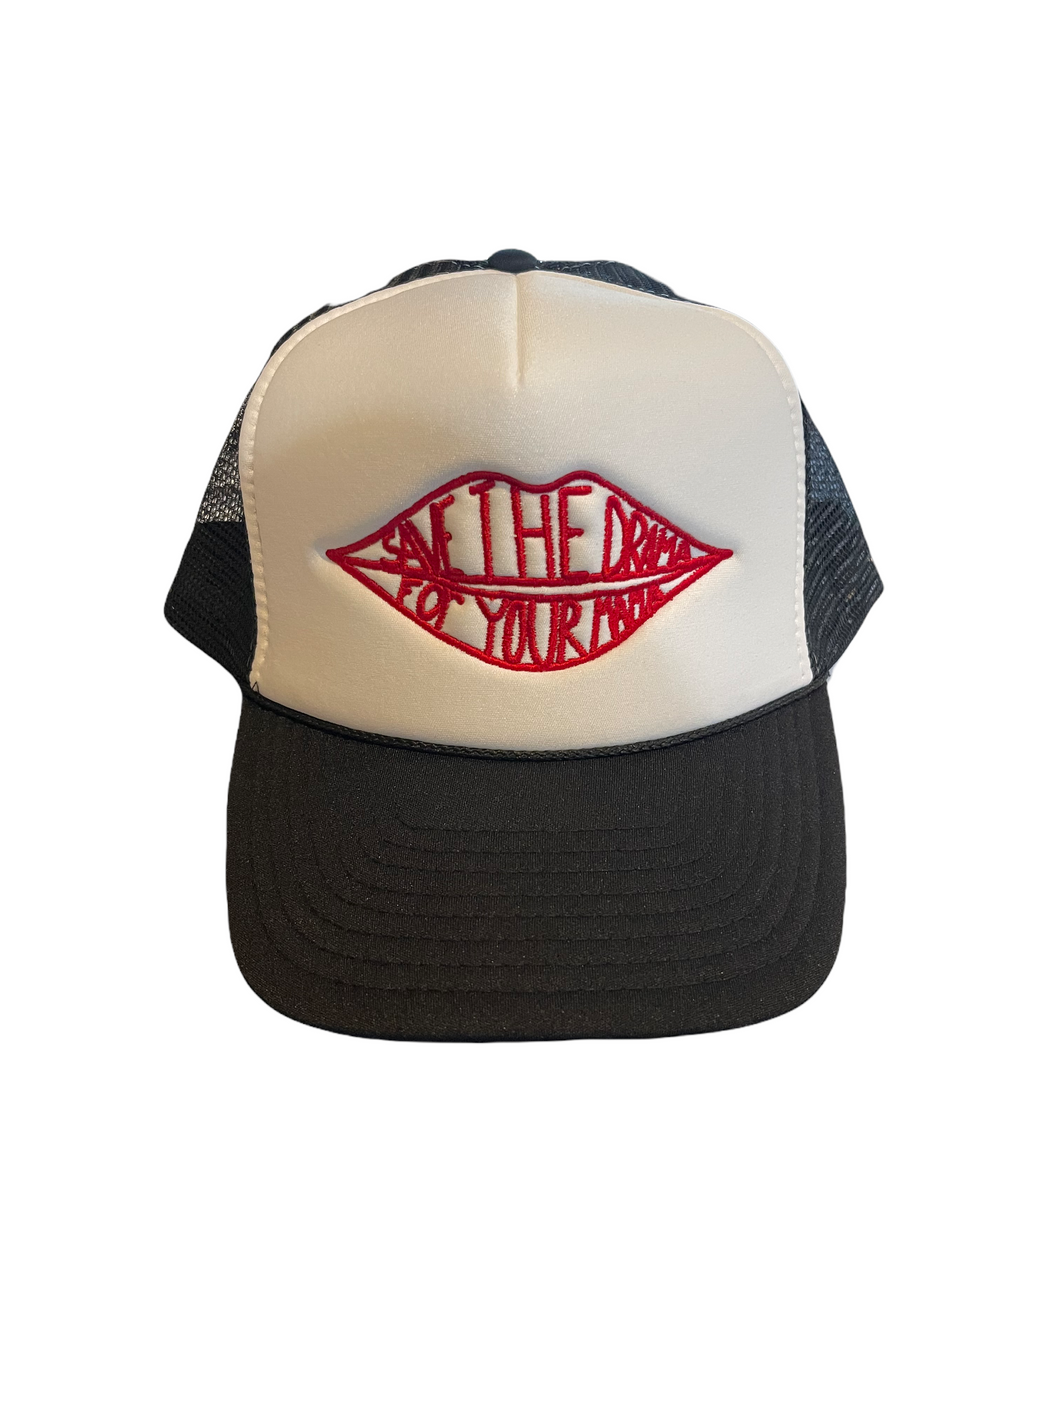 Save the Drama for your Mama Trucker Hat